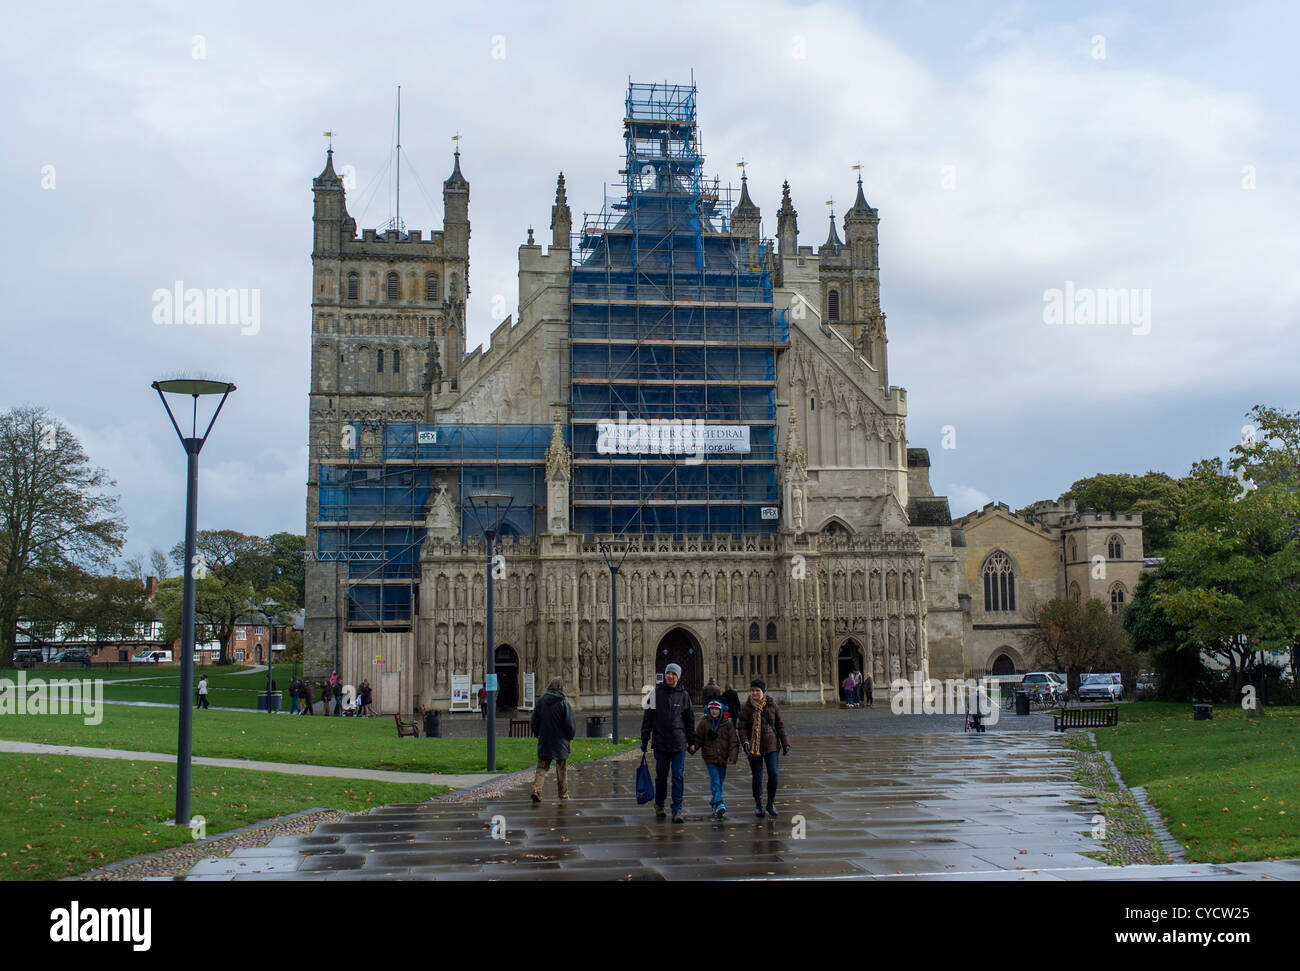 October 31st 2012. Exeter Cathedral, Exeter, Devon, England on a rainy day with scaffolding, shoppers and pedestrians. Stock Photo